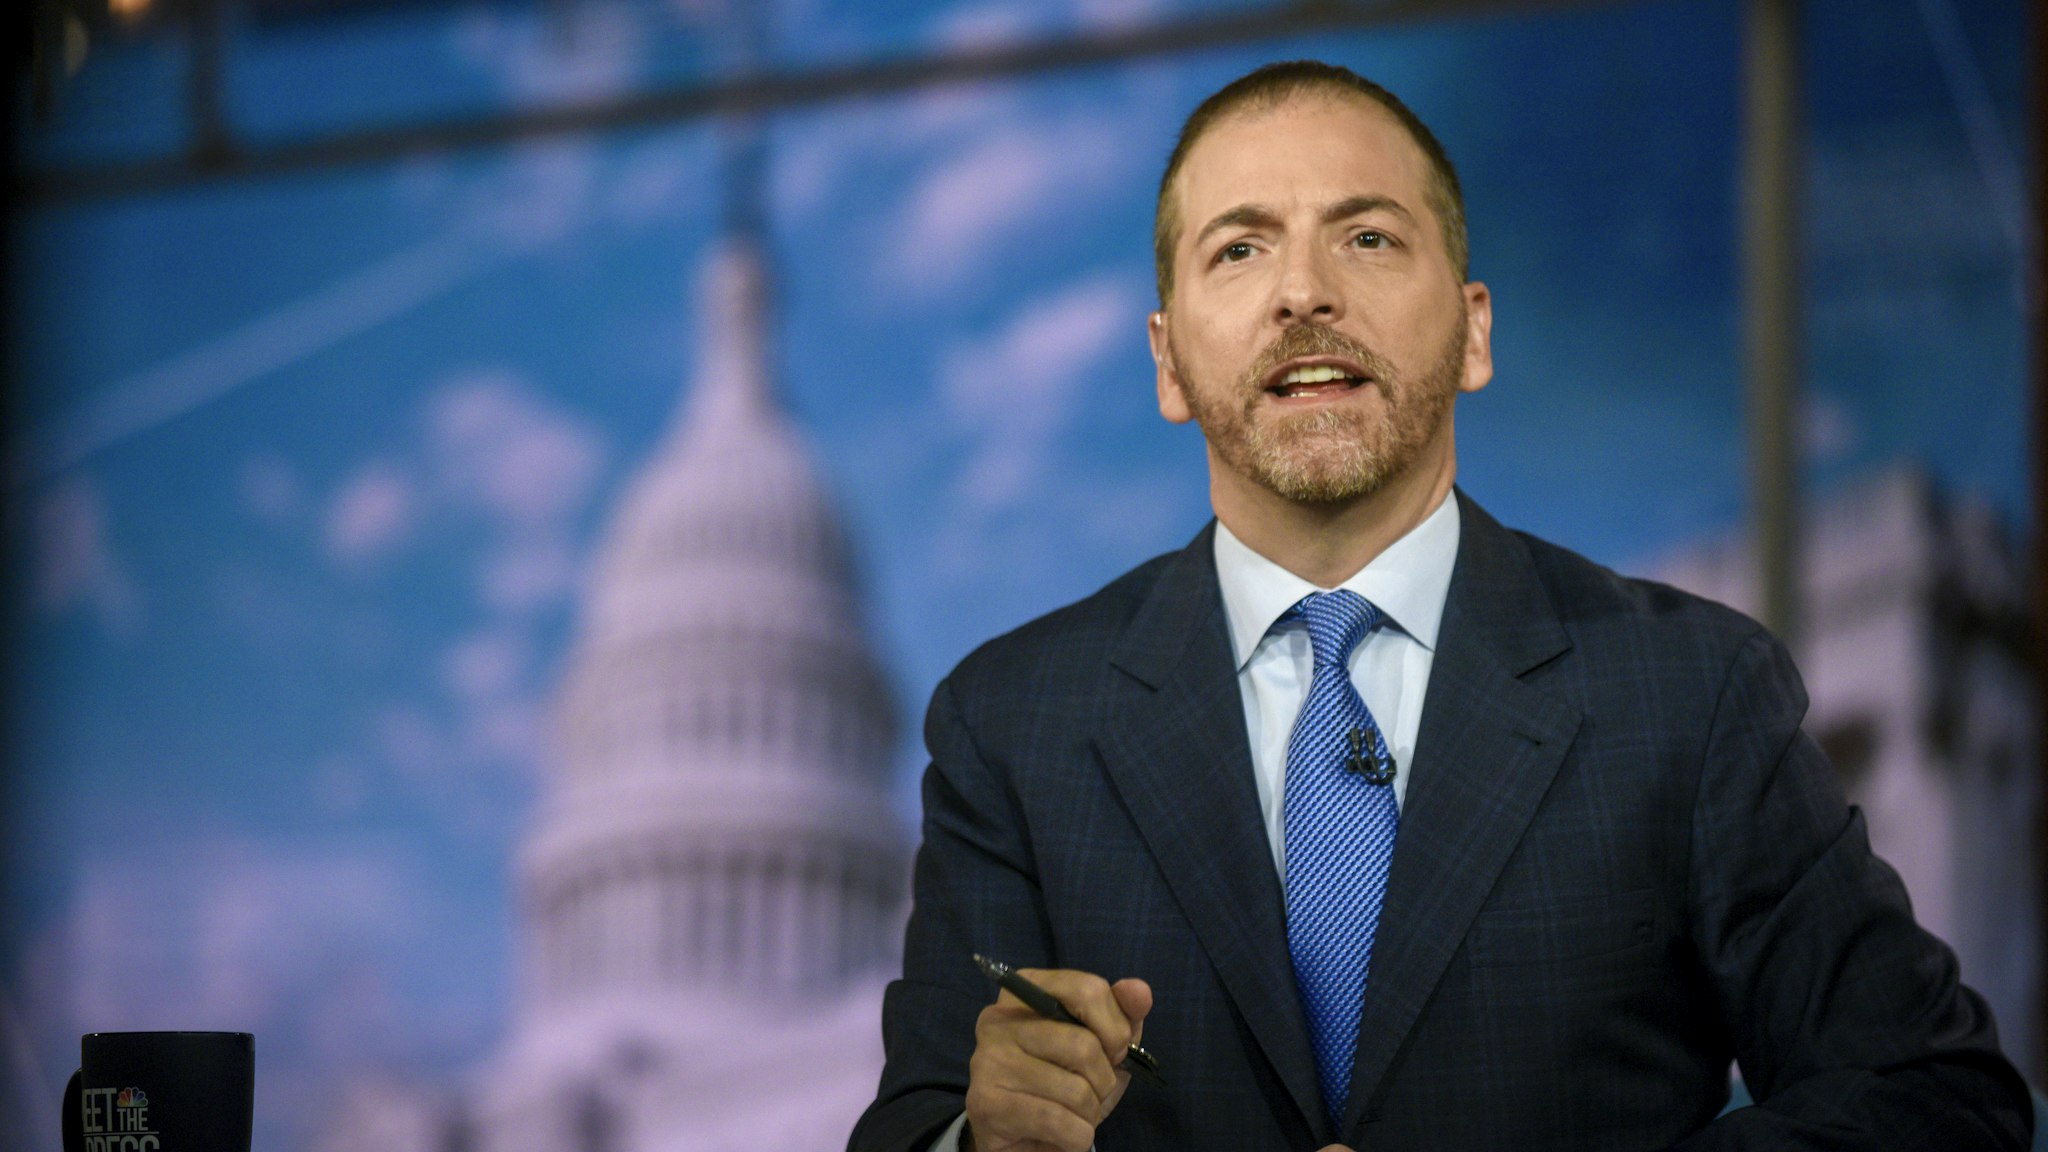 Moderator Chuck Todd appears on "Meet the Press" in Washington, D.C., Sunday July 28, 2019.